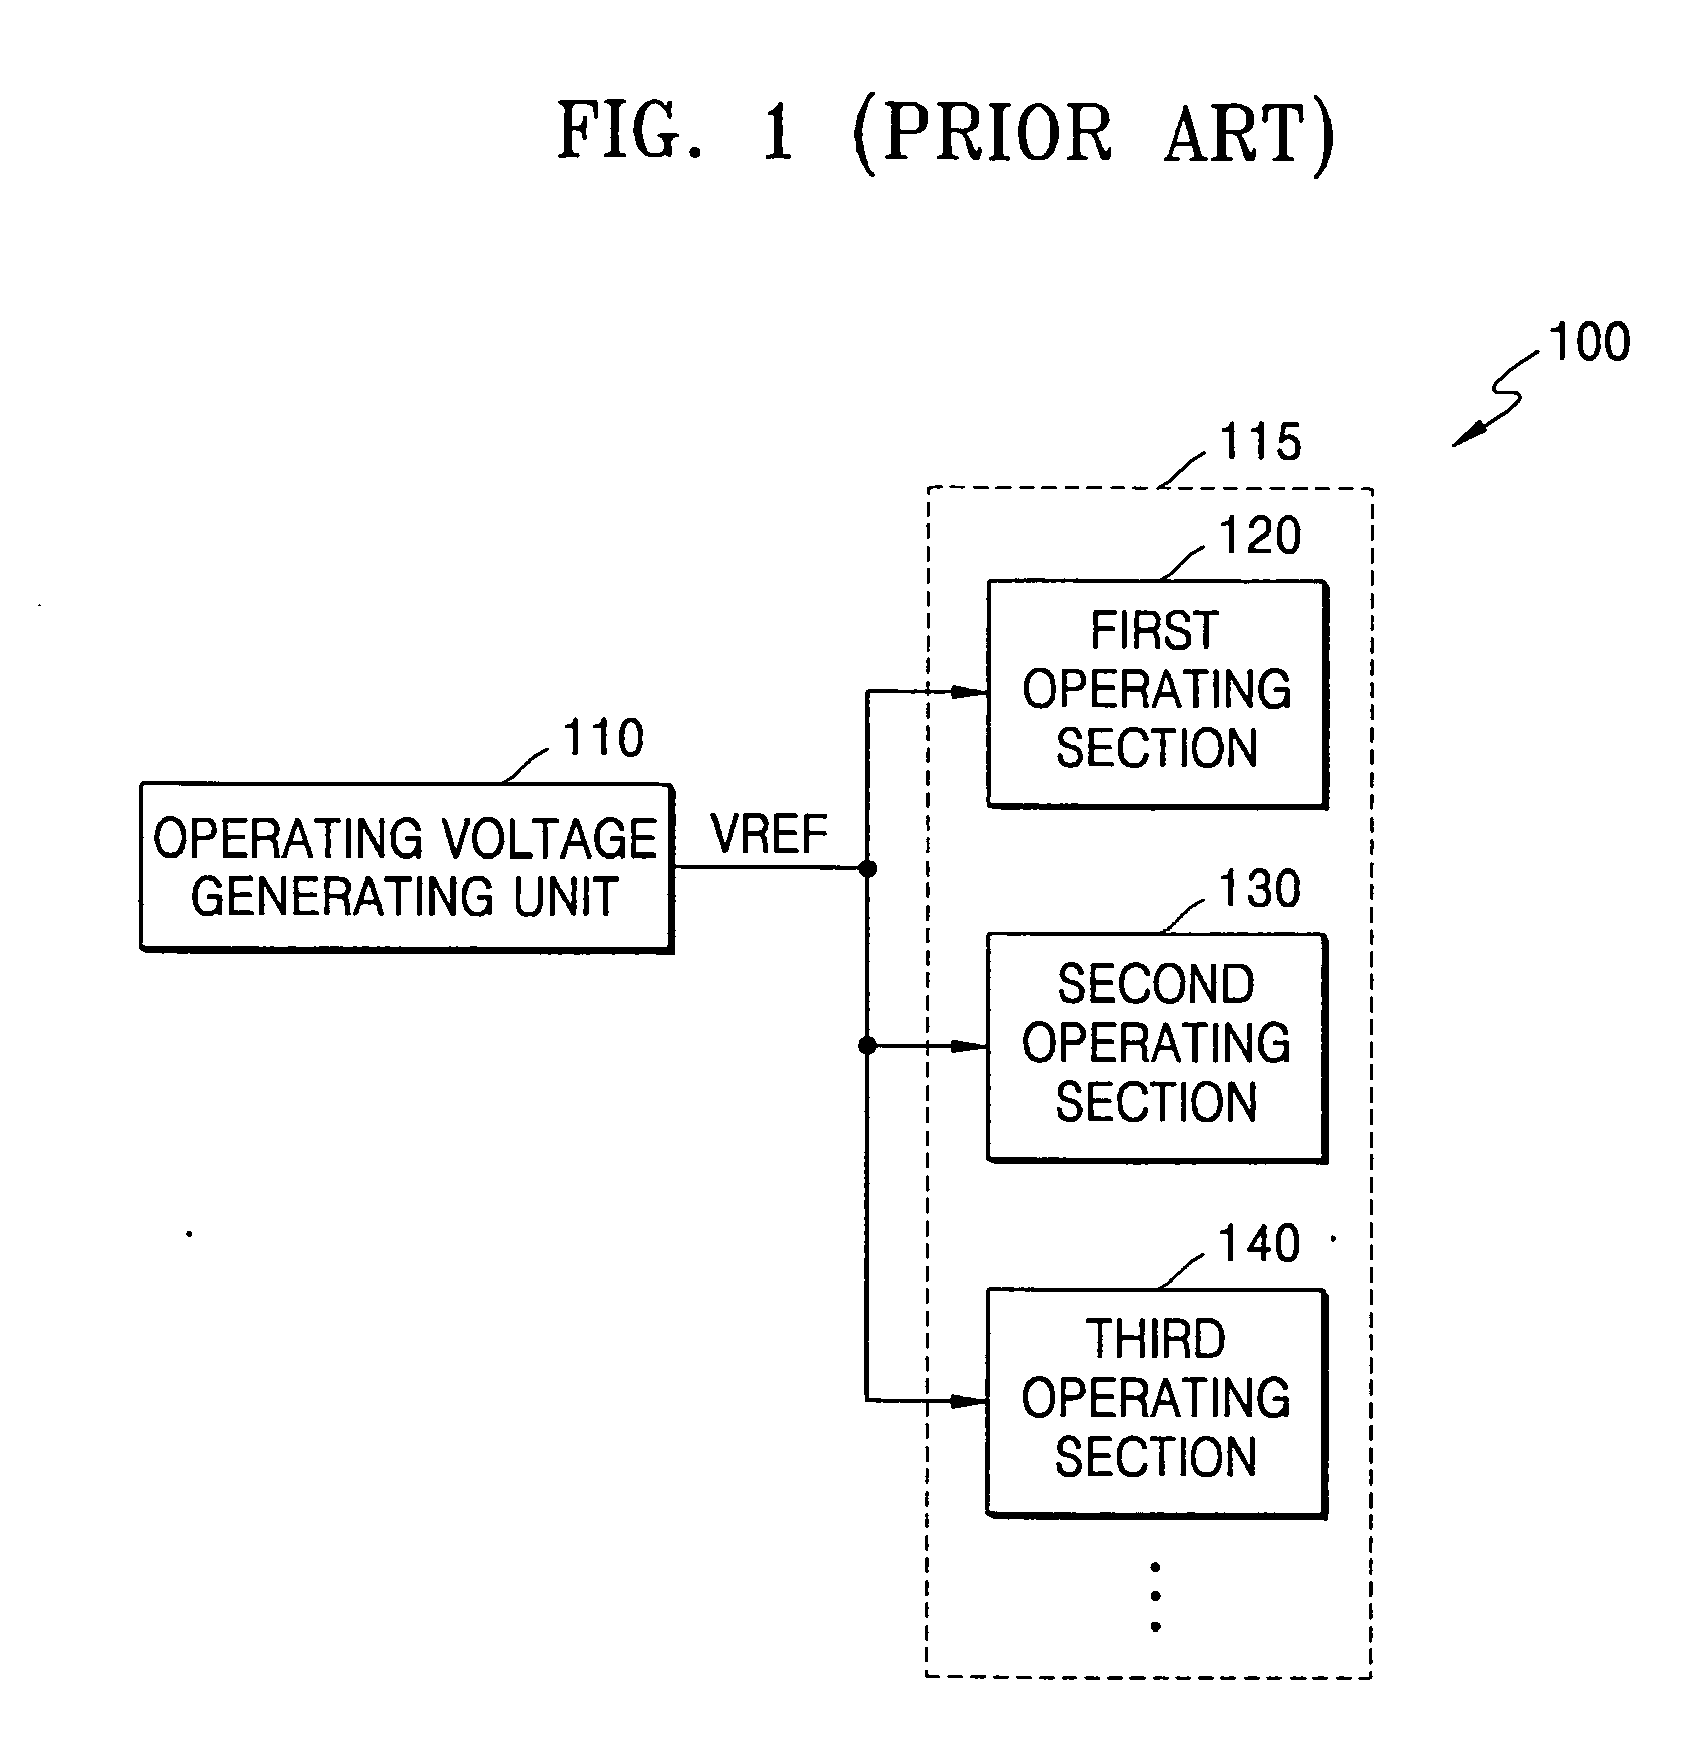 Integrated circuit devices that support dynamic voltage scaling of power supply voltages